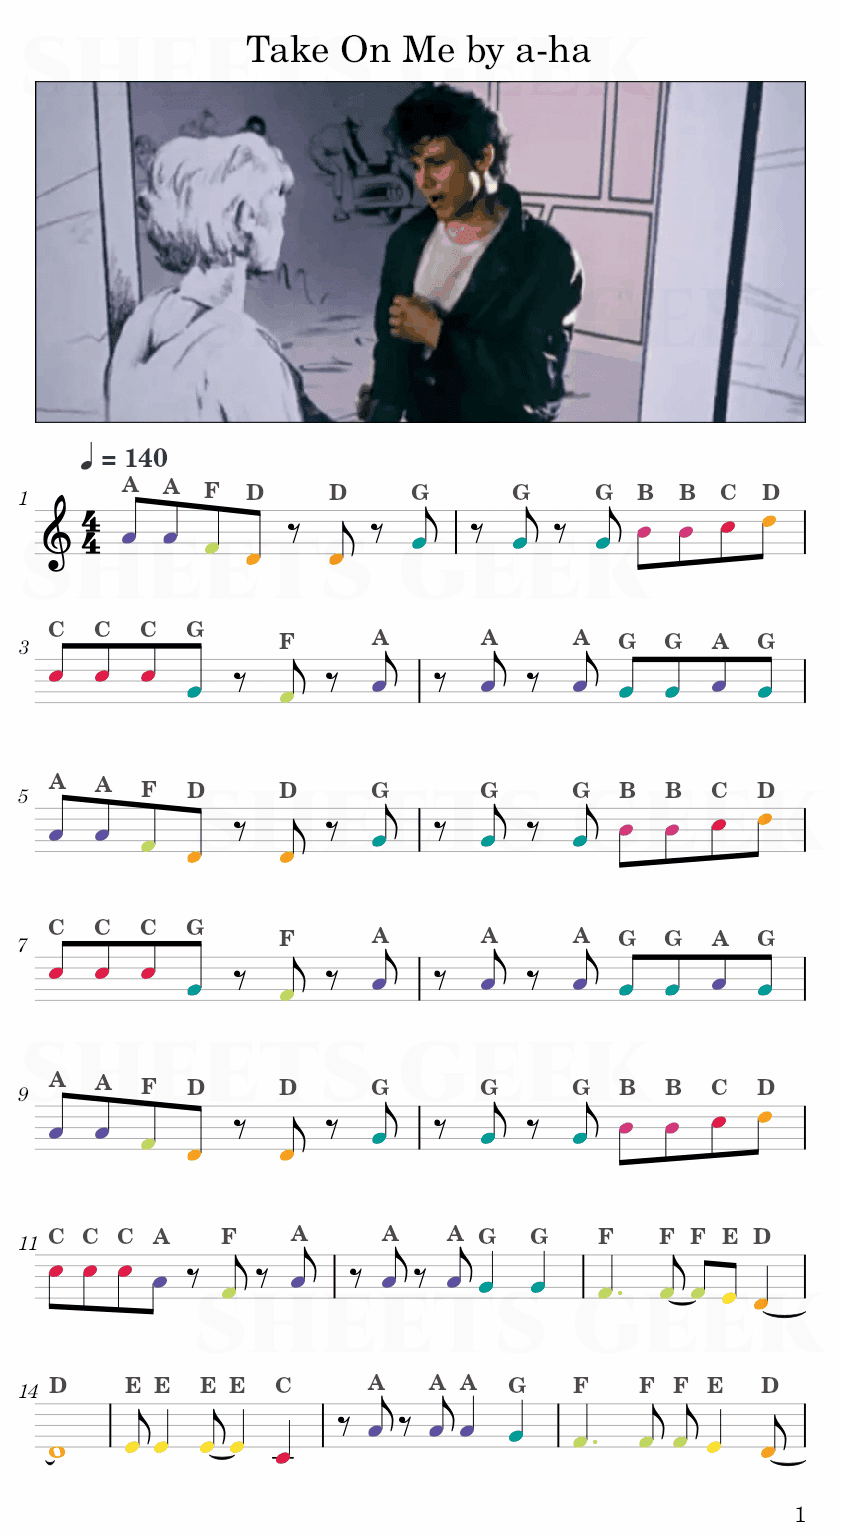 Take On Me by a-ha Easy Sheet Music Free for piano, keyboard, flute, violin, sax, cello page 1